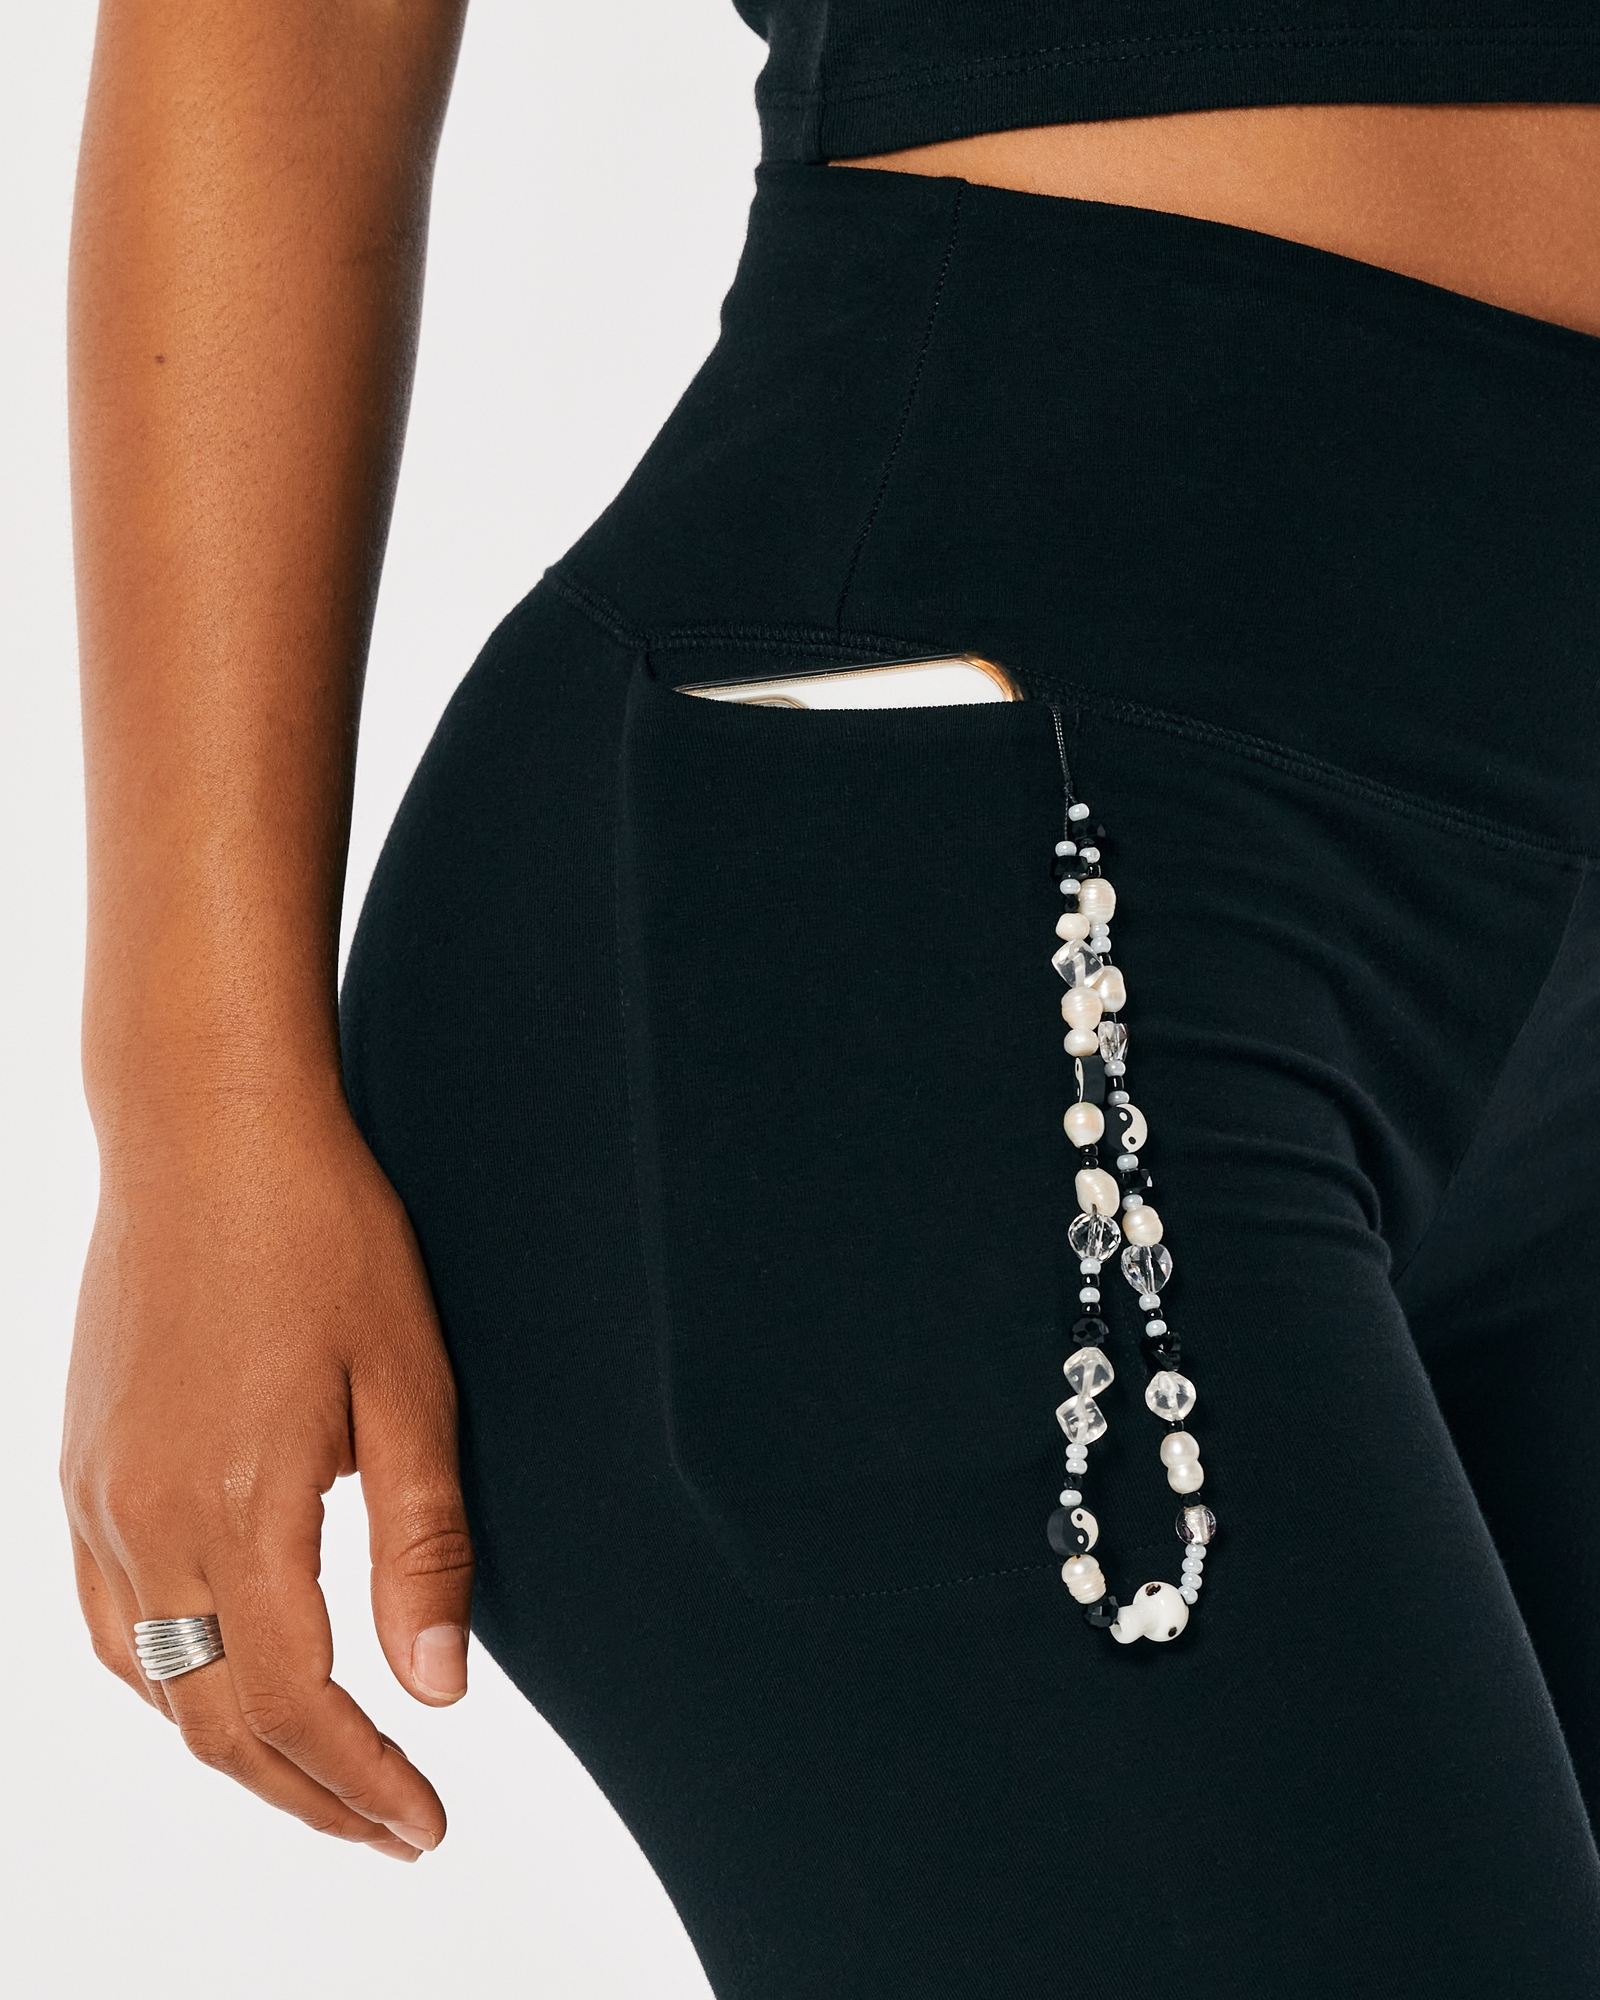 Hollister Ultra High-rise Cinched Waist Flare Leggings in Black